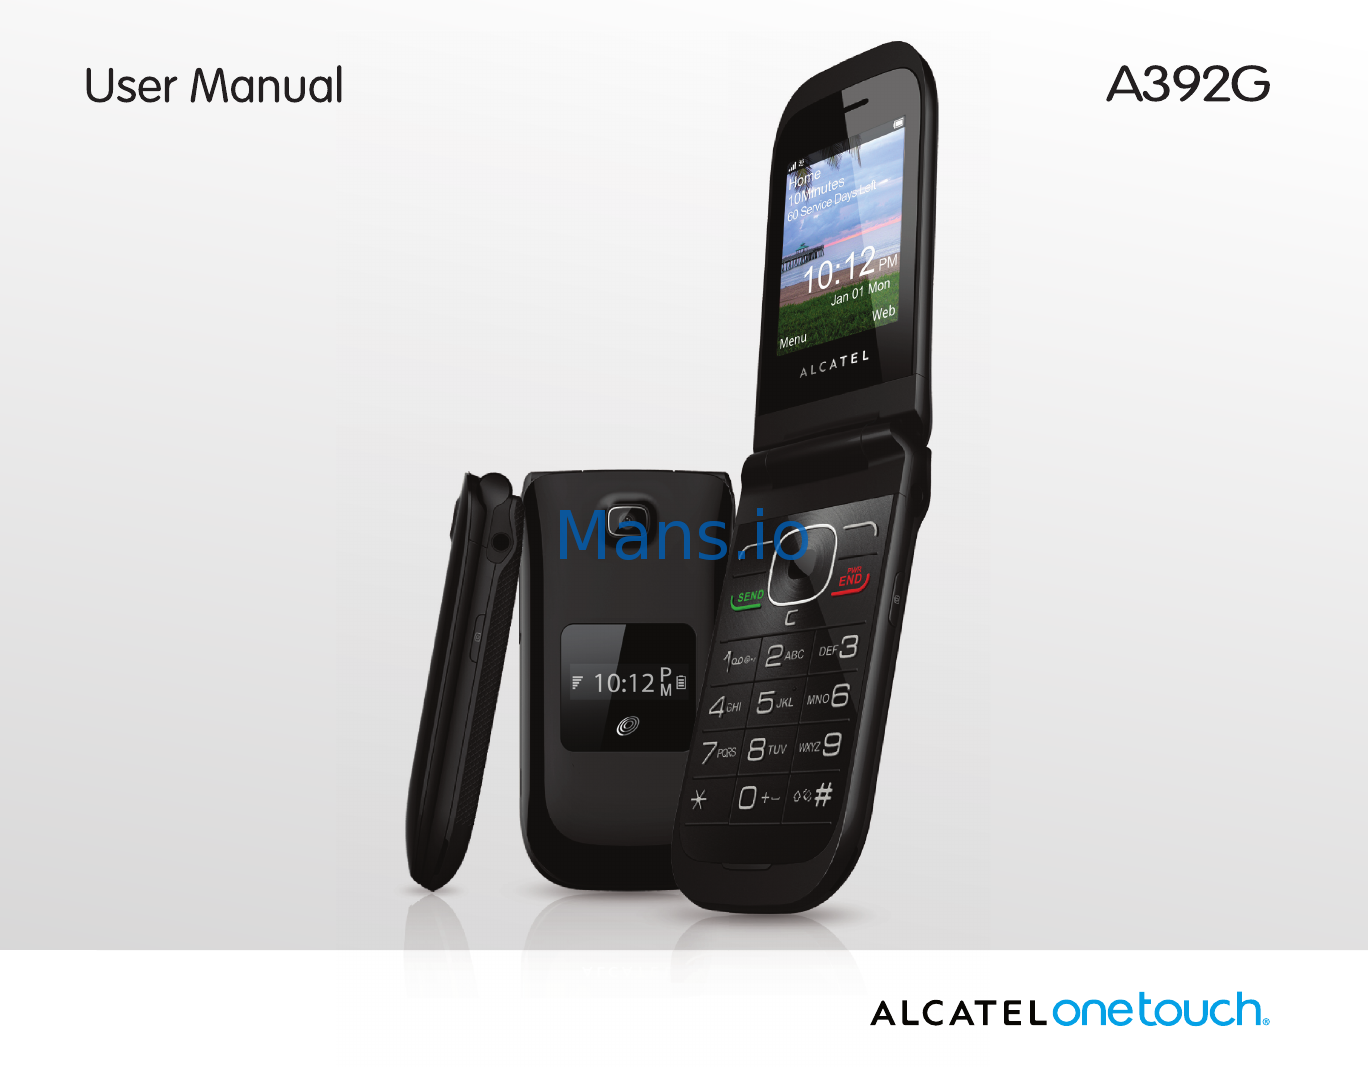 operating instruction for alcatel onetouch a392cc